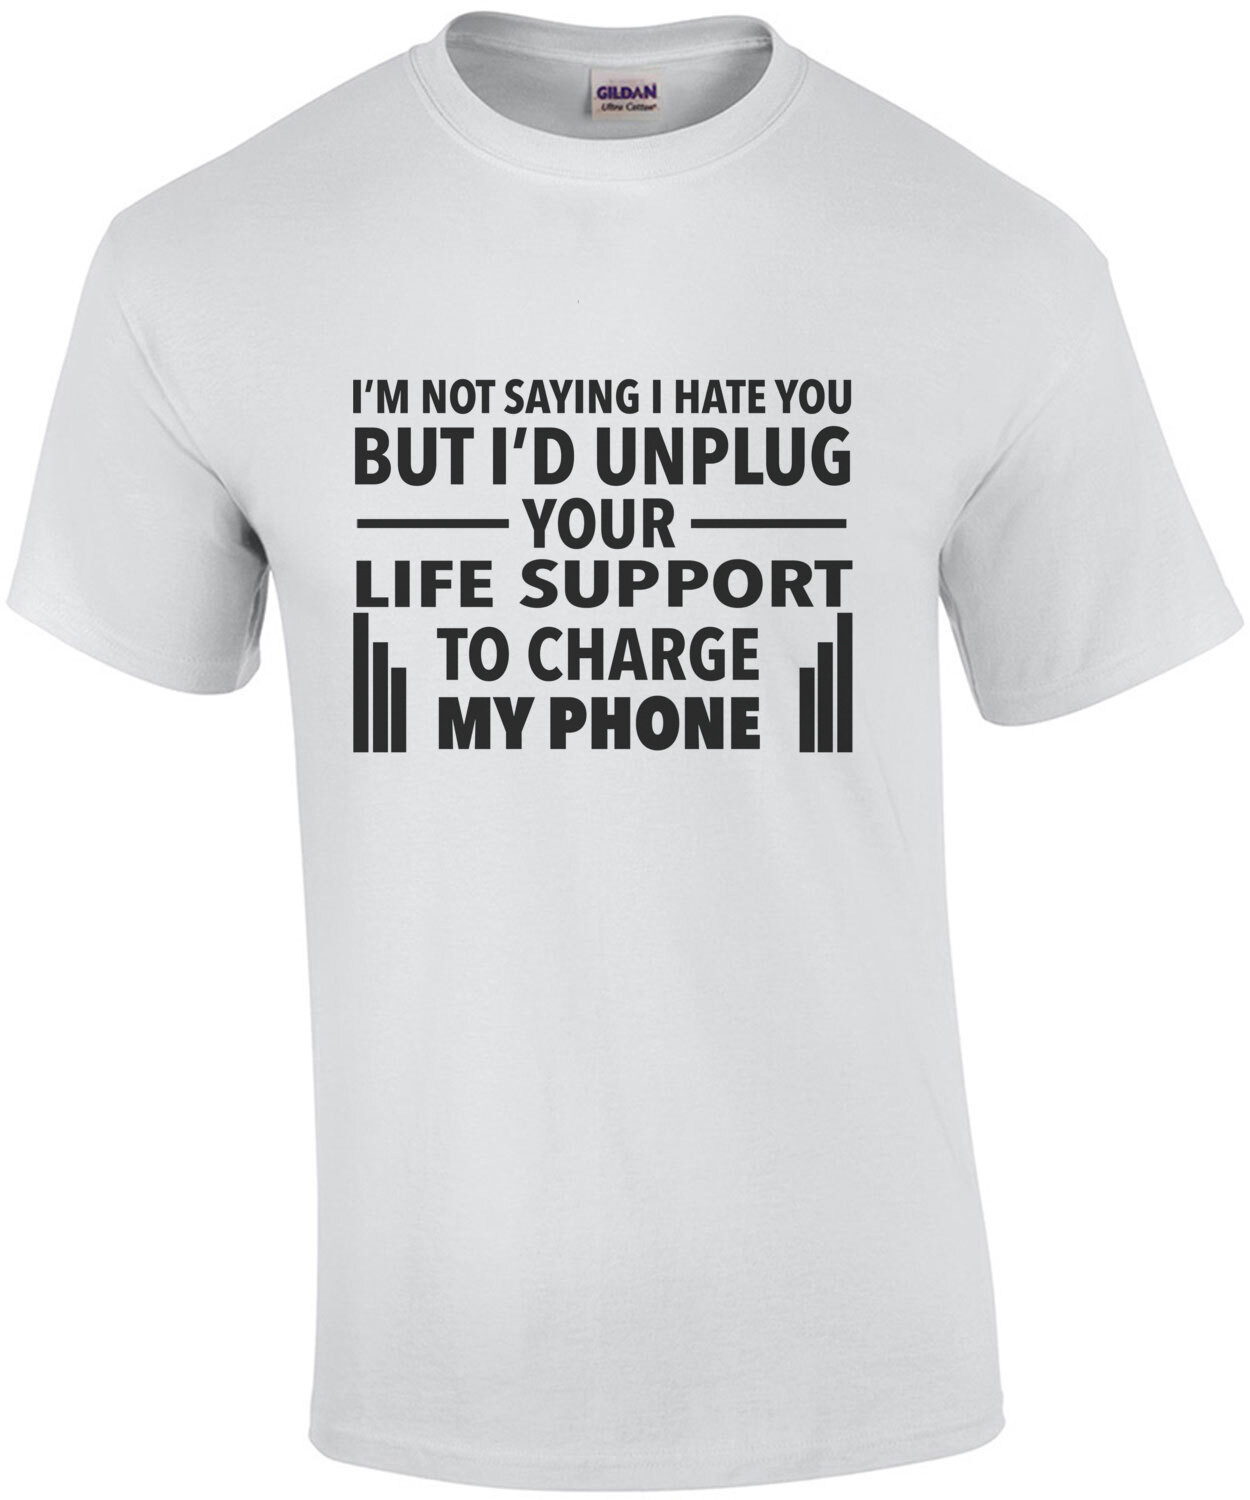 I'm not saying I hate you but I'd unplug your life support to charge my phone - sarcastic t-shirt